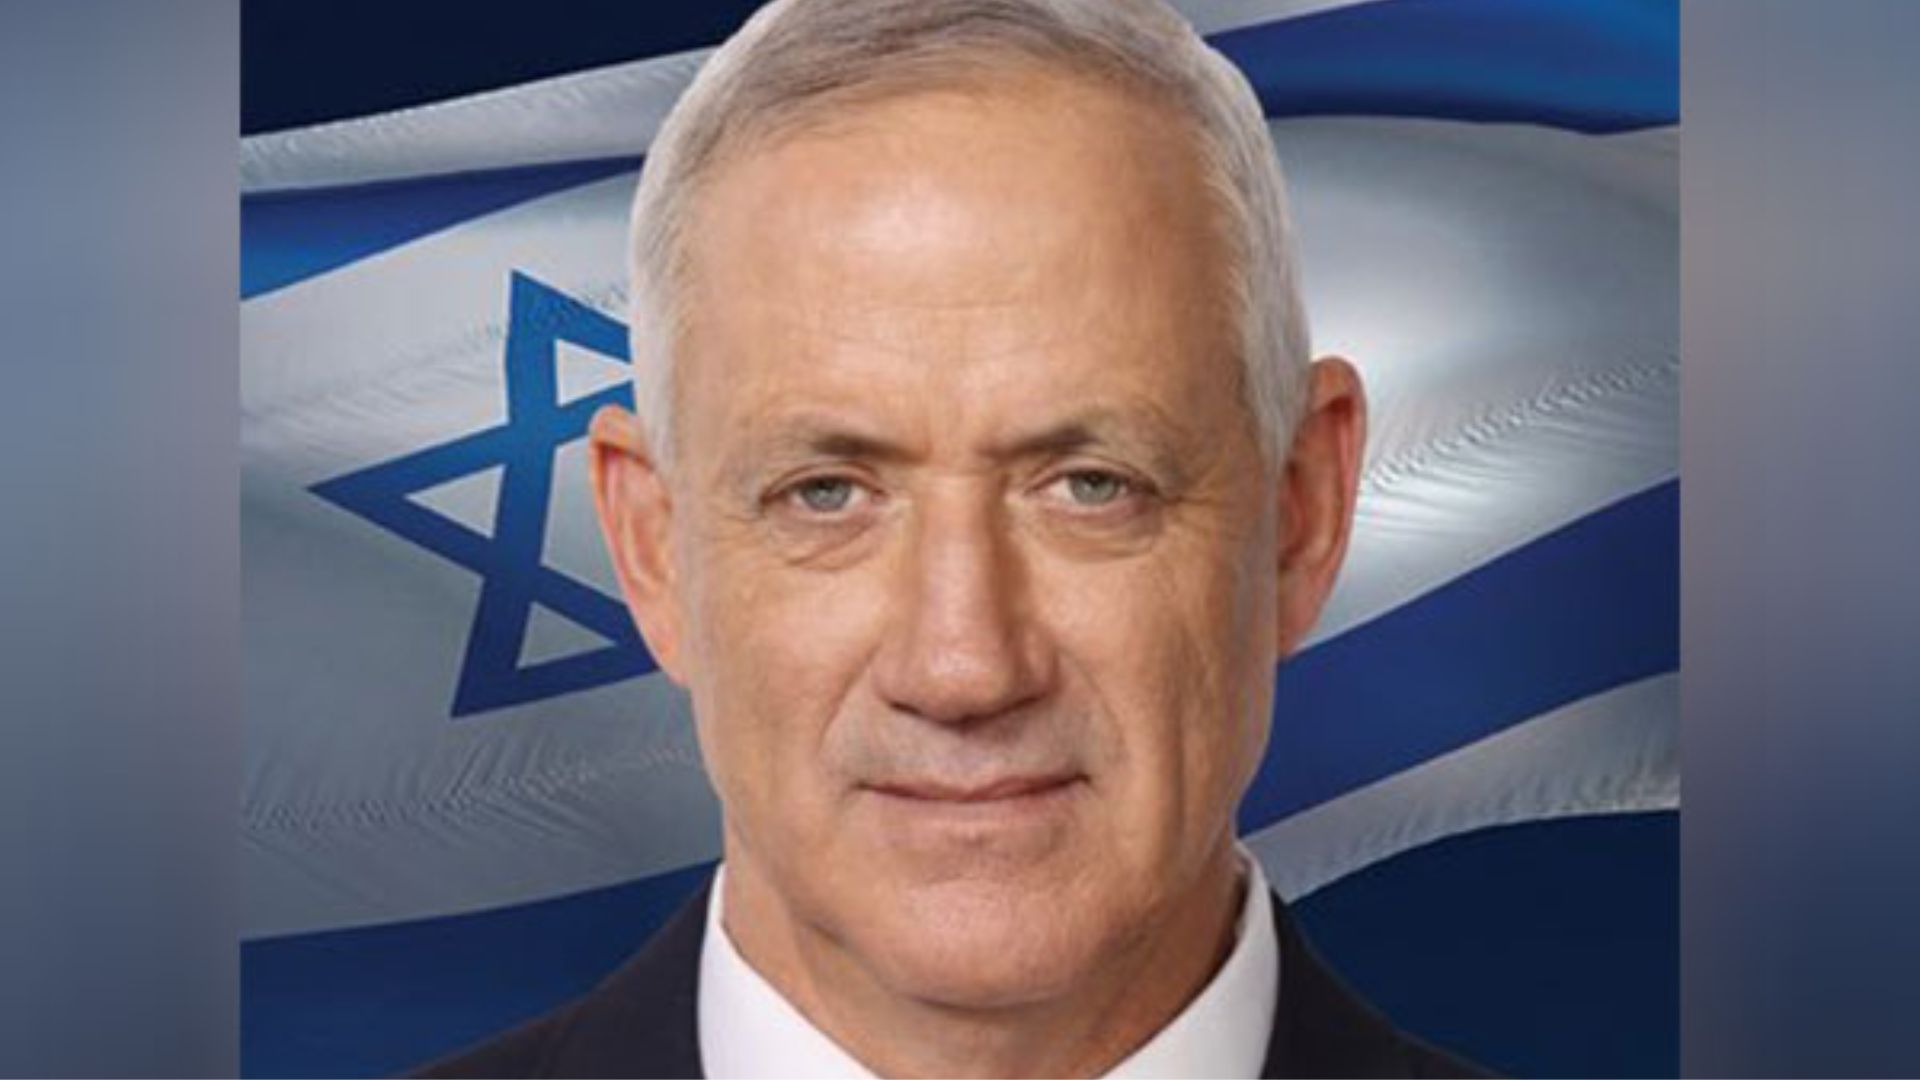 Israeli Minister Benny Gantz Resigns from Netanyahu's War Cabinet Amid Ongoing Conflict